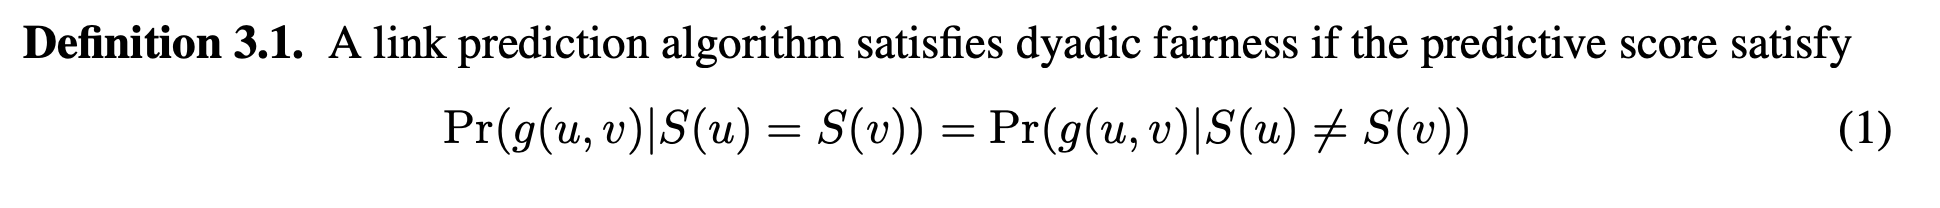 Definition 3.1 from the paper. A link prediction algorithm satisfy [sic] dyadic fairness if the predictive score satisfy [sic] the distribution of the predictive score of a link between nodes u and v given that u and v belong to the same sensitive group equals the distribution of the predictive score of a link between u and v given that u and v do not belong to the same sensitive group.